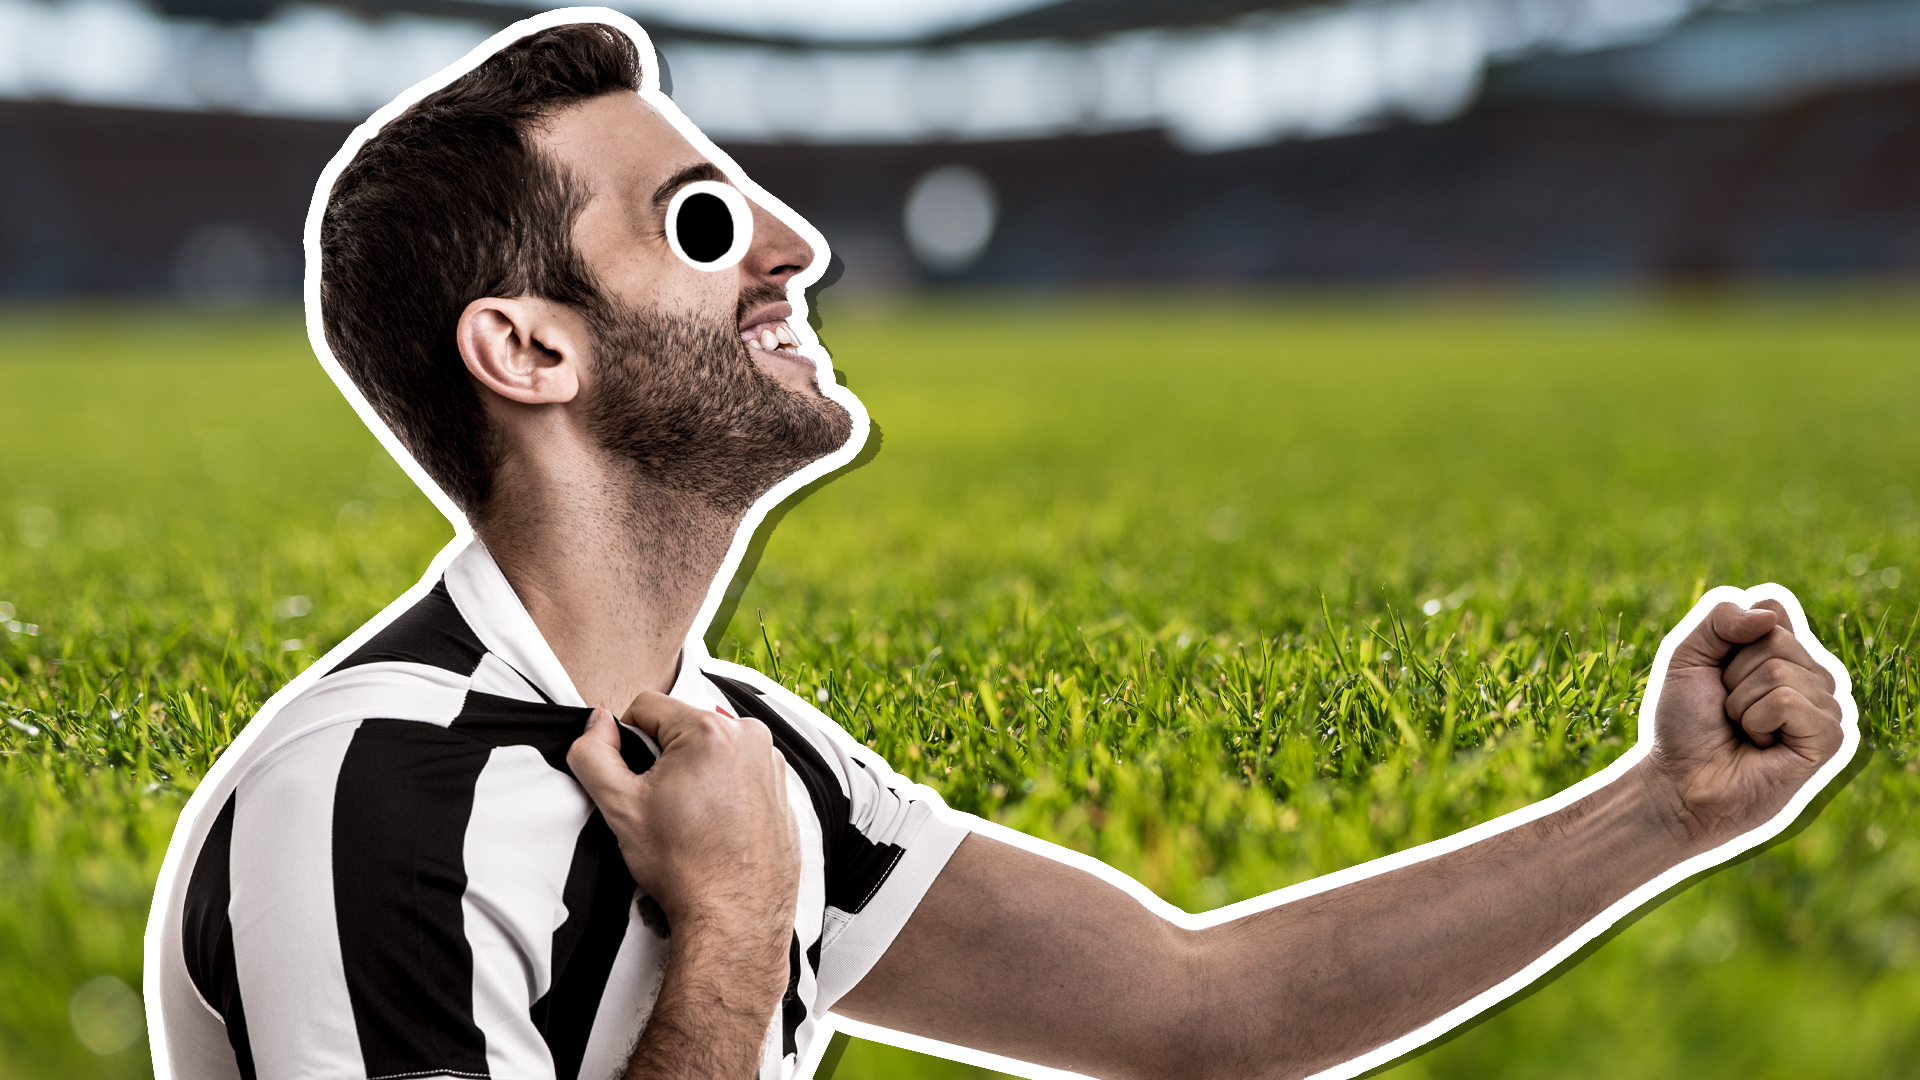 A man in a black and white striped shirt celebrating a goal